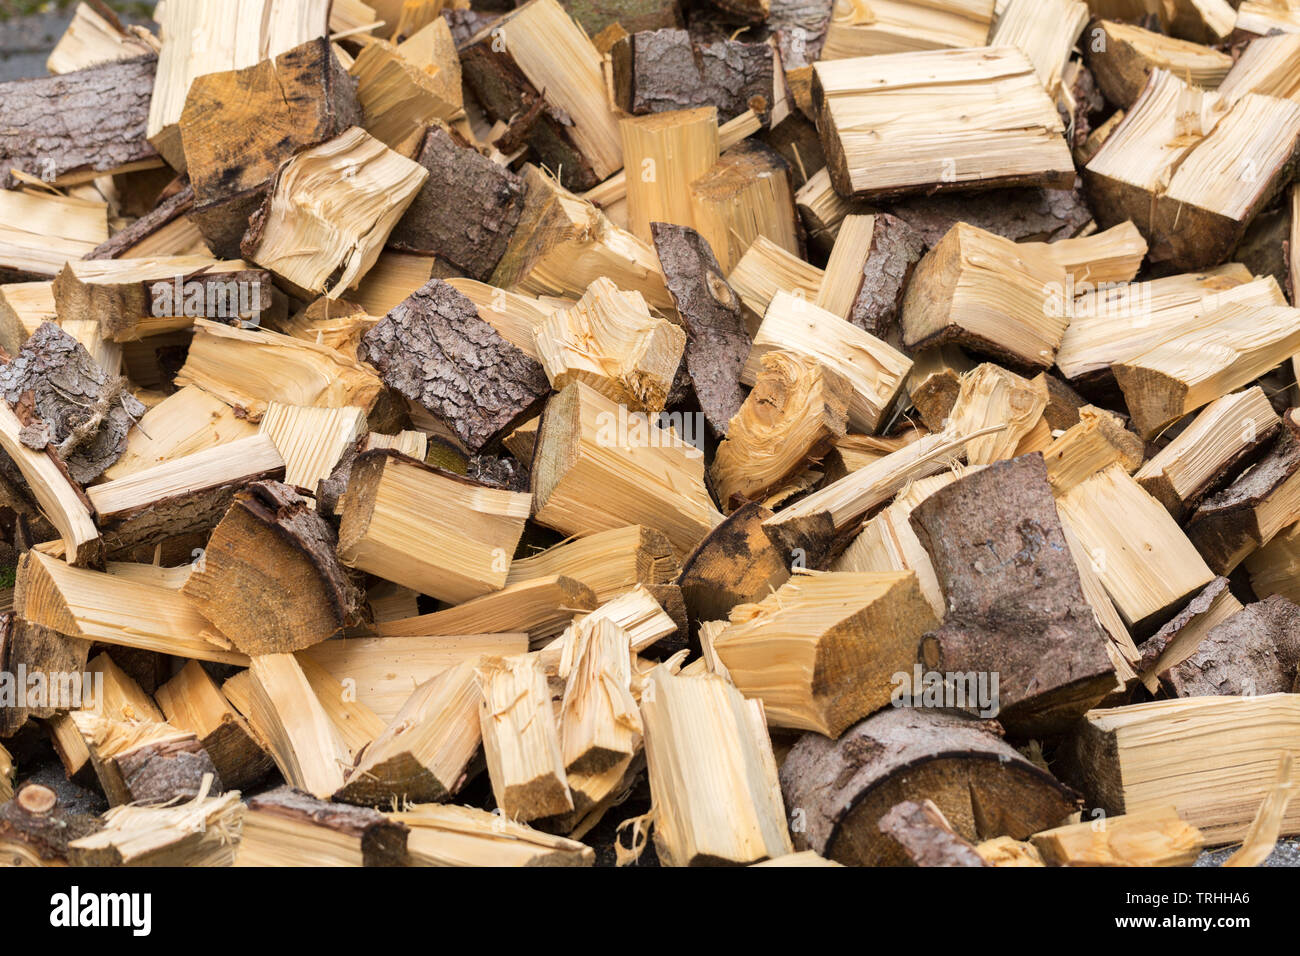 Isolated view on chopped wood. Piled in an unsorted way, looking quite chaotic. Ready to be set on fire. Stock Photo